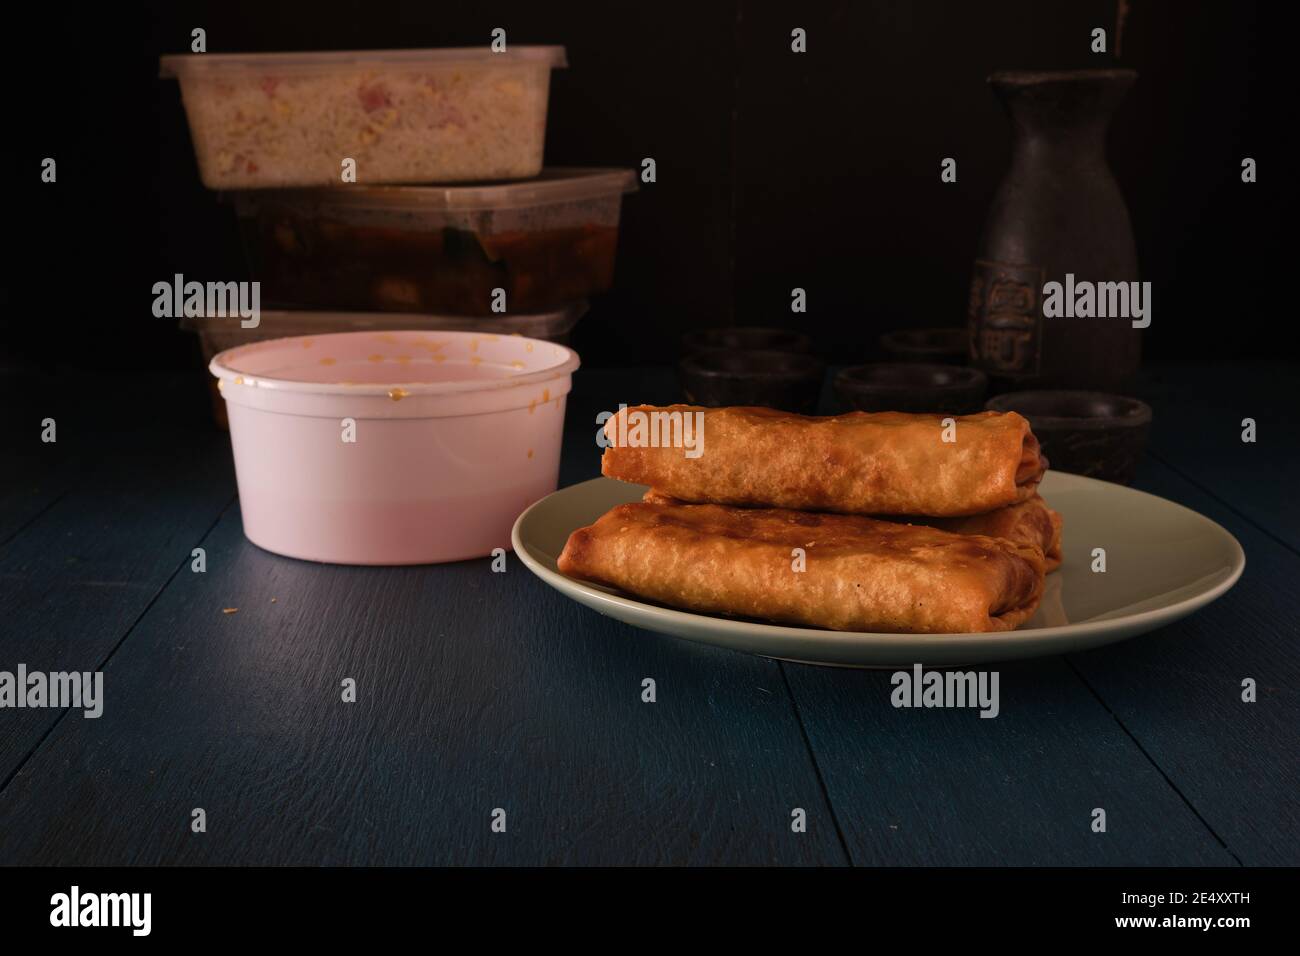 Photo of three spring rolls with sauce over a blue table in a dark enviroment Stock Photo